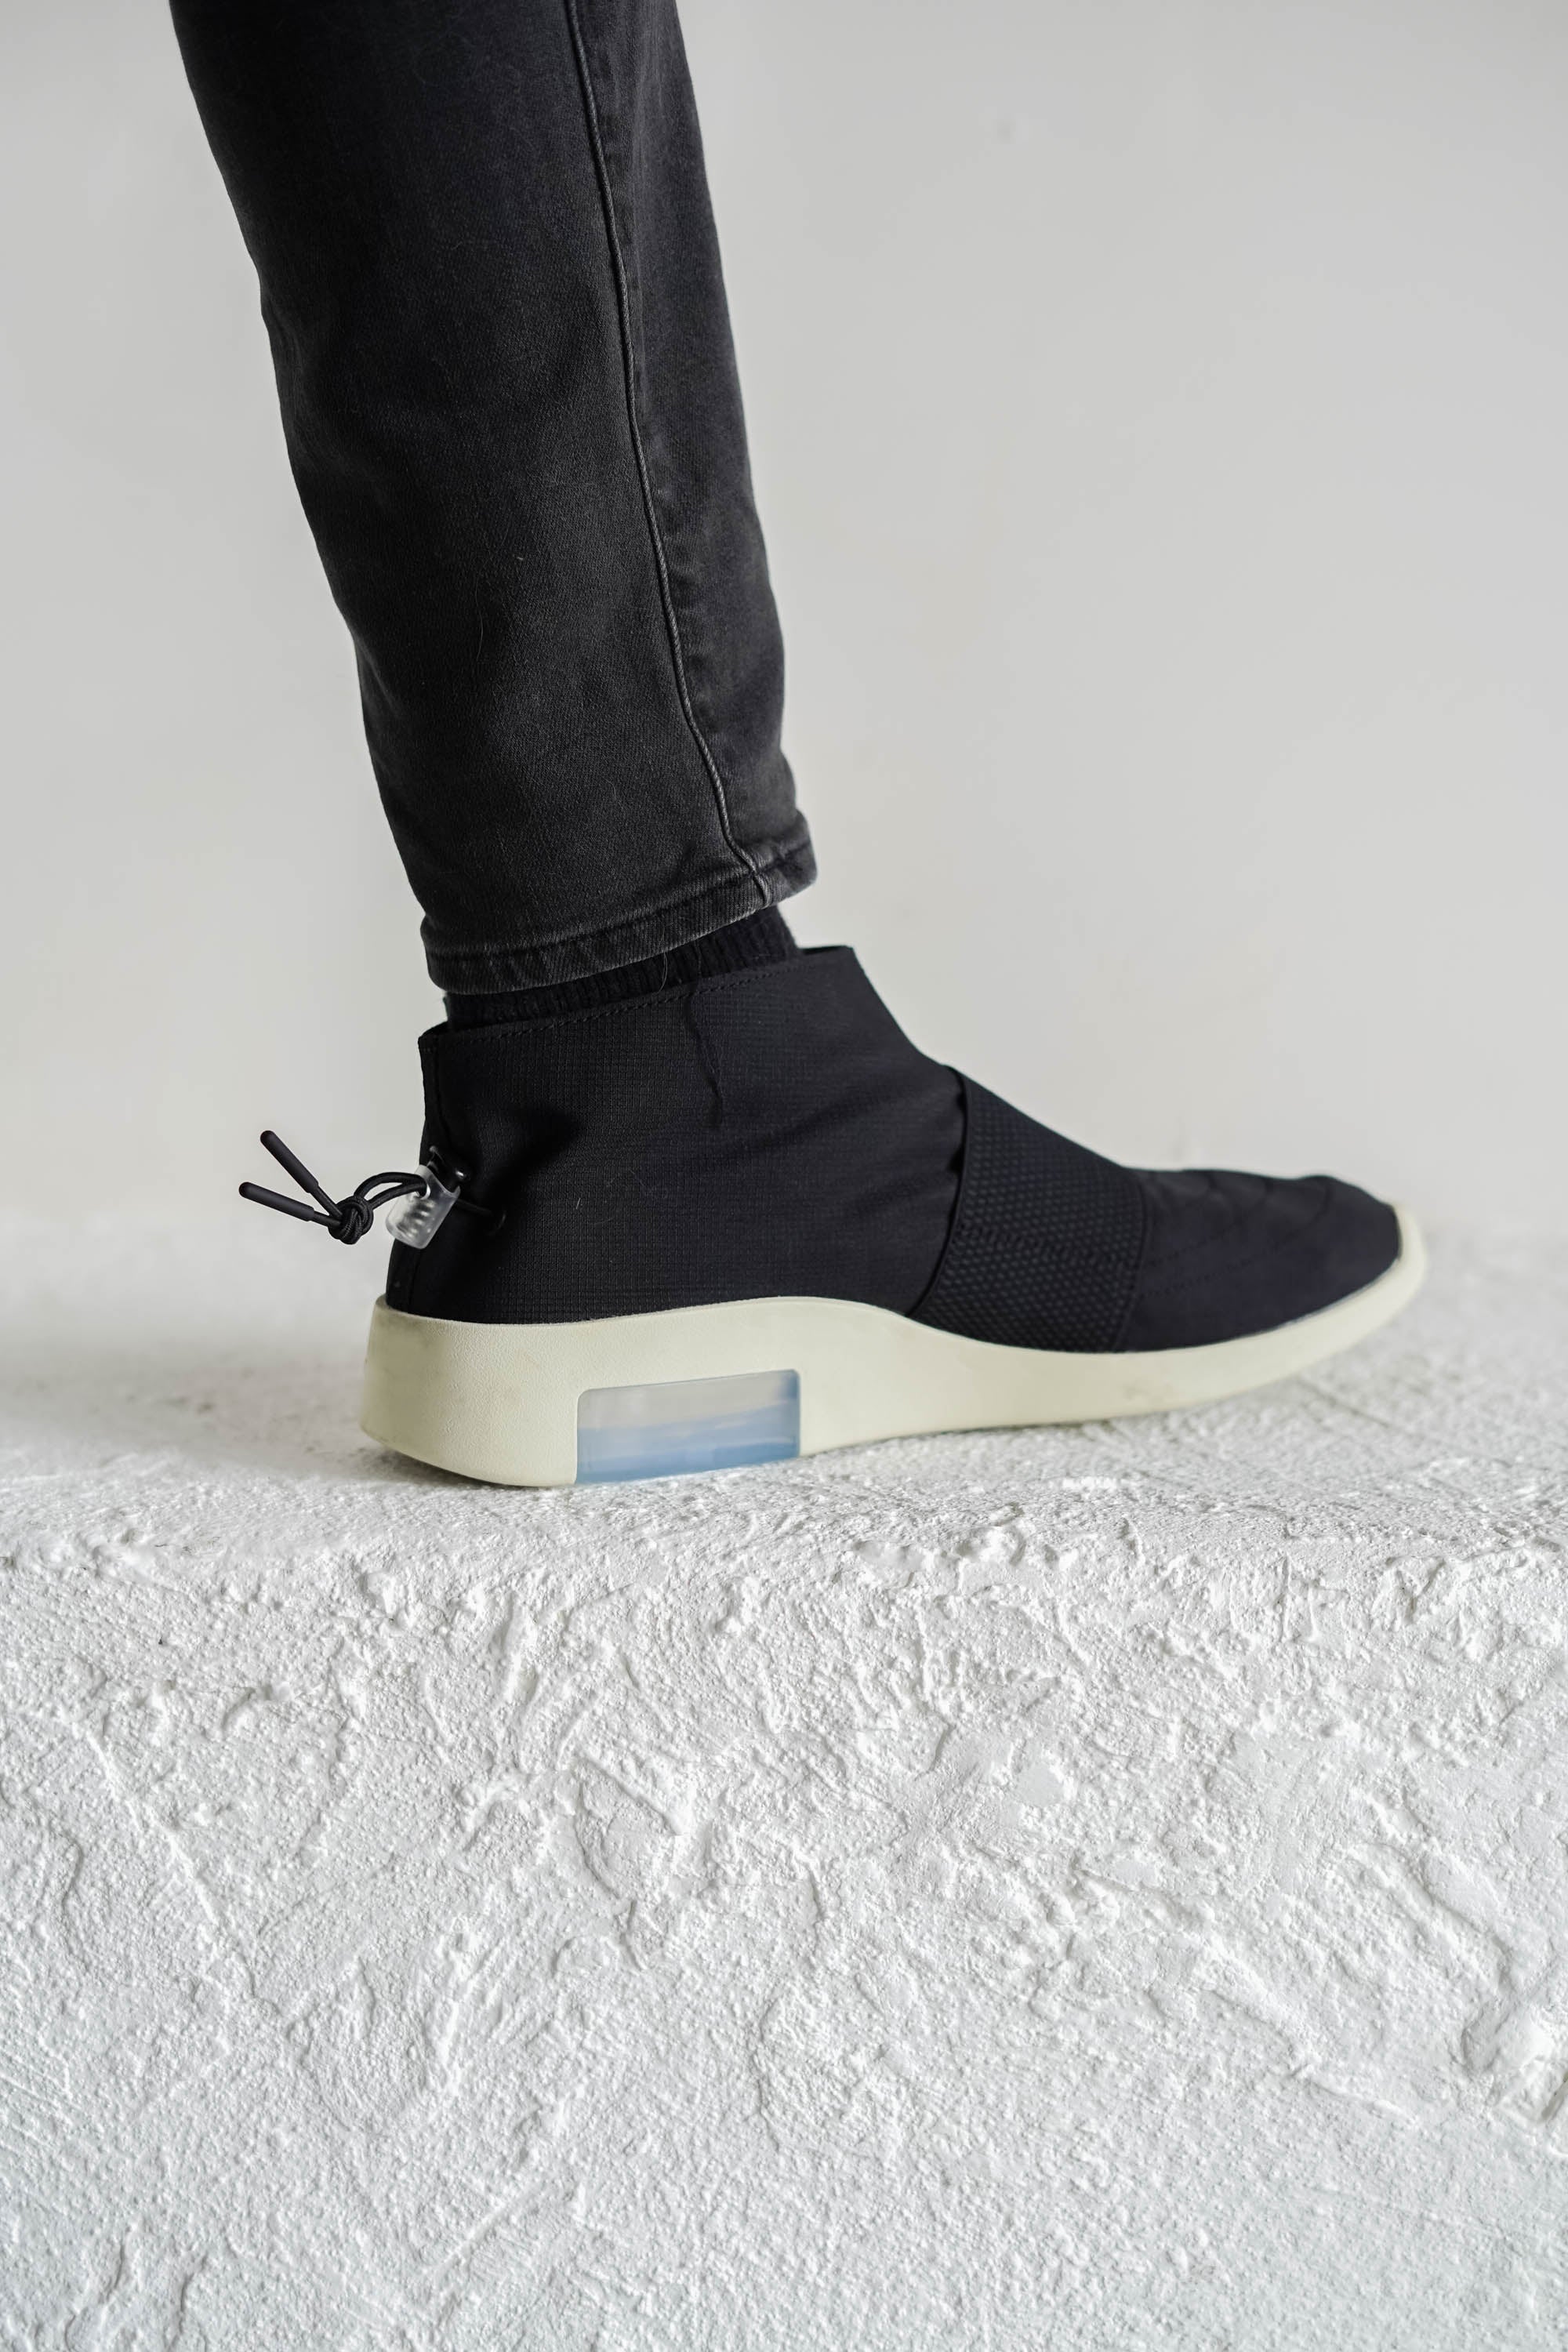 Pre-owned NIKE Fear of God Moccasin Black 12